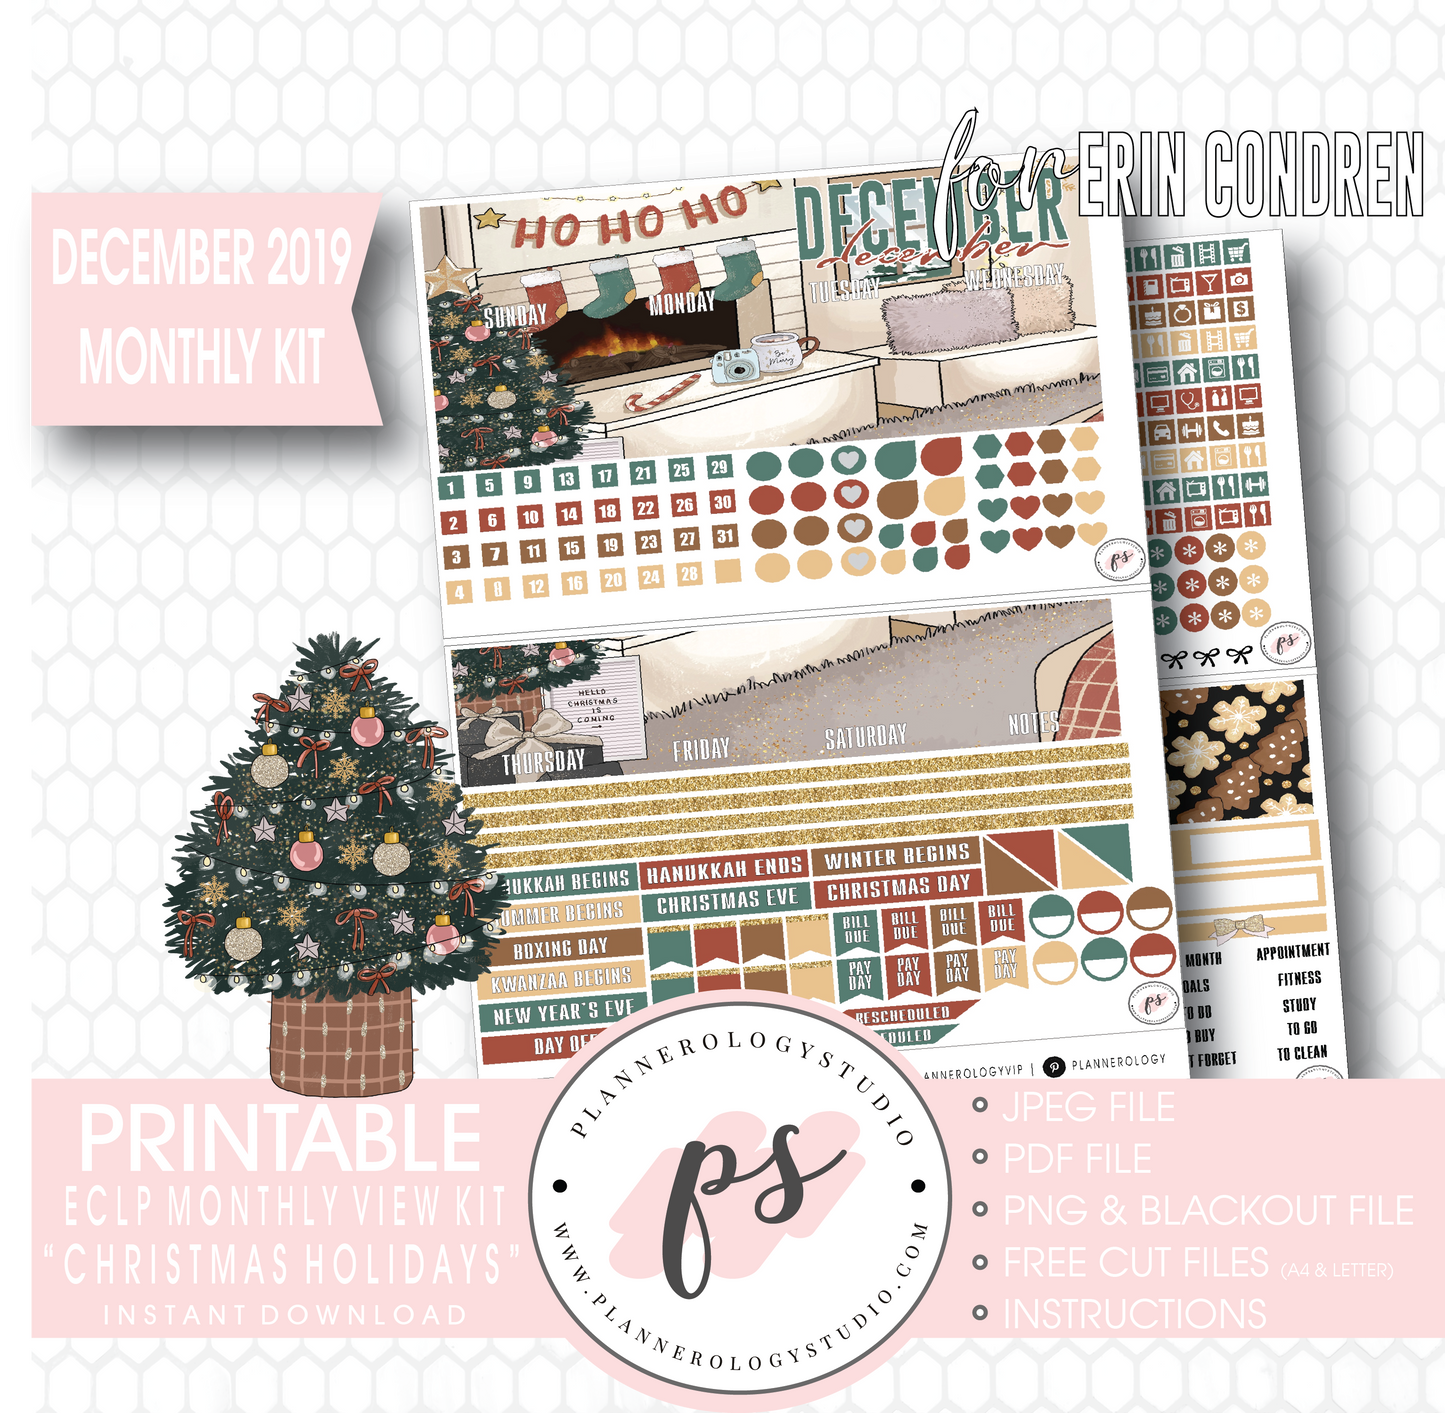 Christmas Holidays December 2019 Monthly View Kit Digital Printable Planner Stickers (for use with Erin Condren) - Plannerologystudio